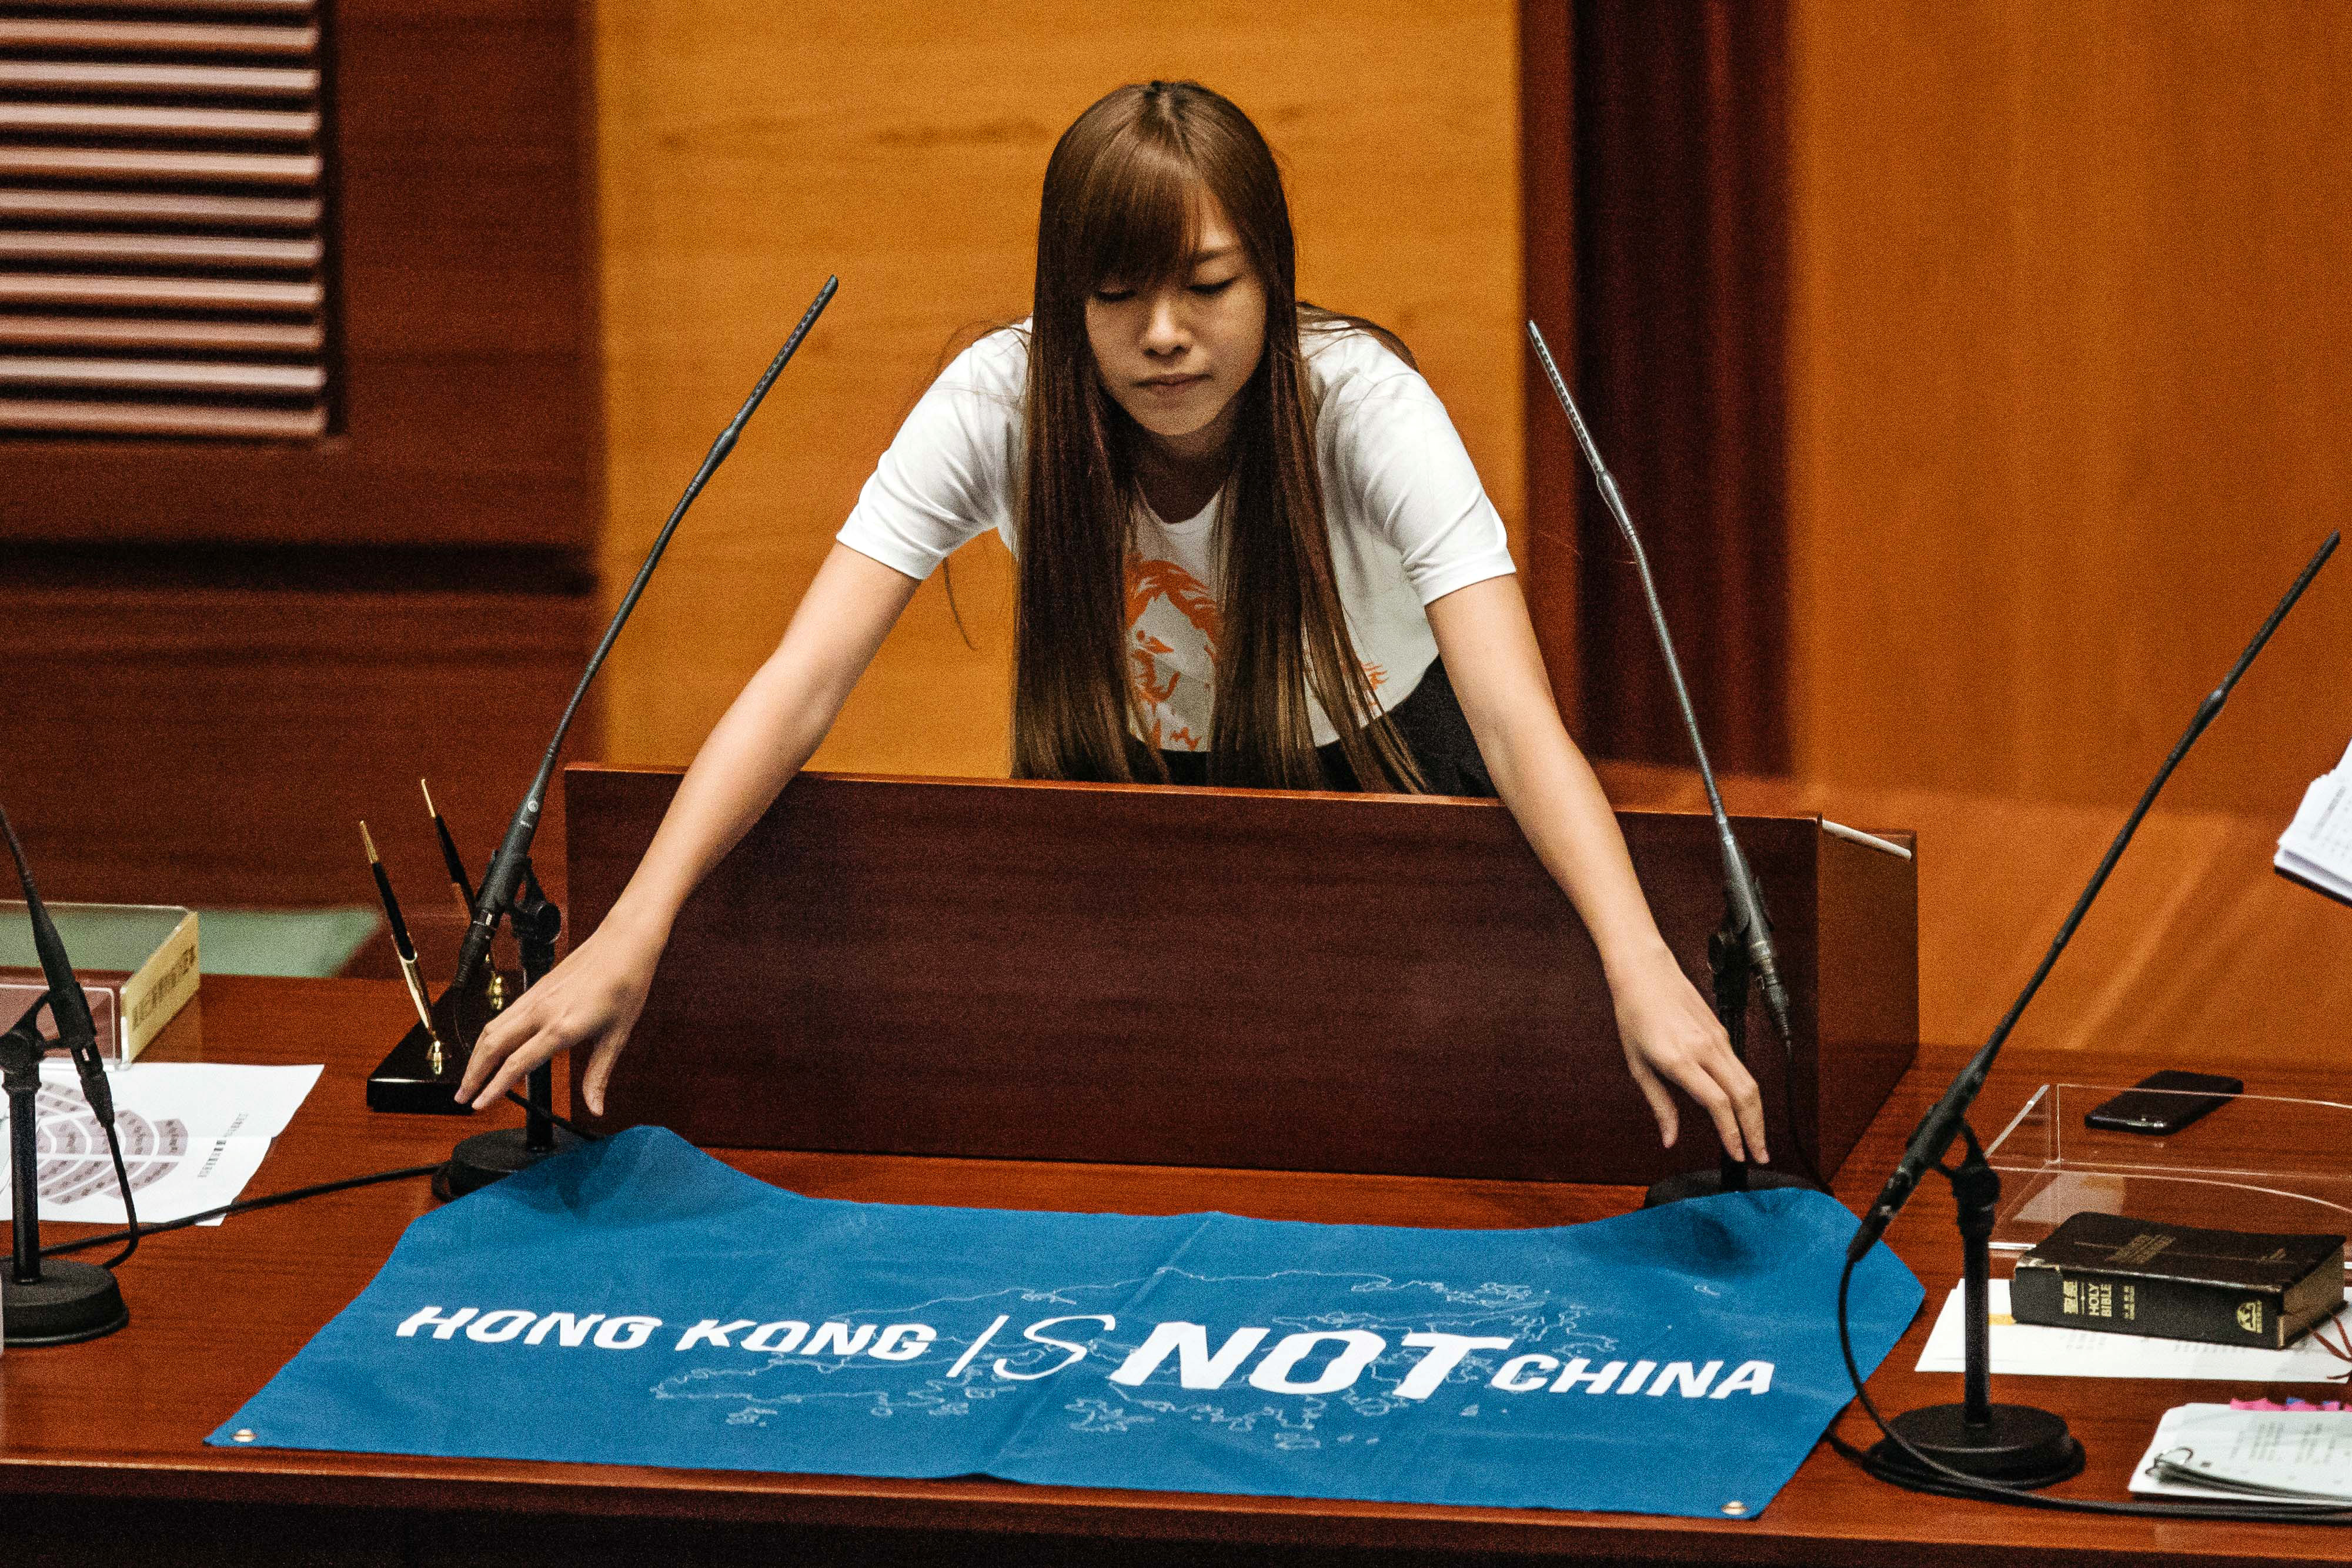 Yau Wai-ching, an incoming lawmaker and member of Youngspiration, unfurls a banner that reads "Hong Kong Is Not China" during an oath-taking ceremony in the chamber of the Legislative Council in Hong Kong on Oct. 12, 2016 (Anthony Kwan—Bloomberg/Getty Images)